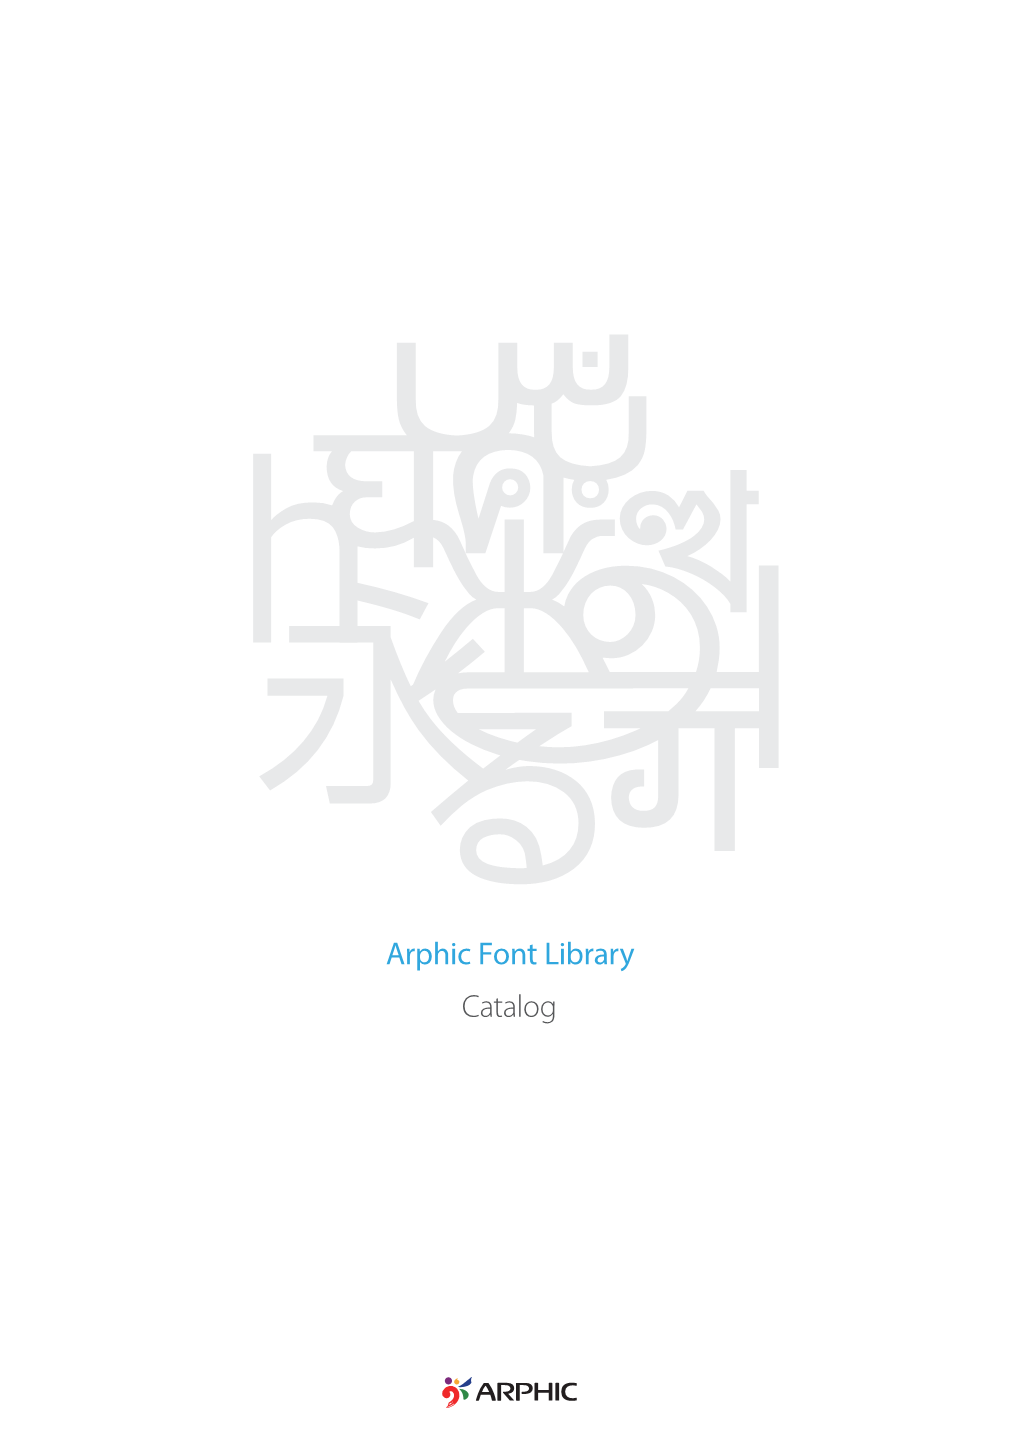 Arphic Font Library Catalog Contents